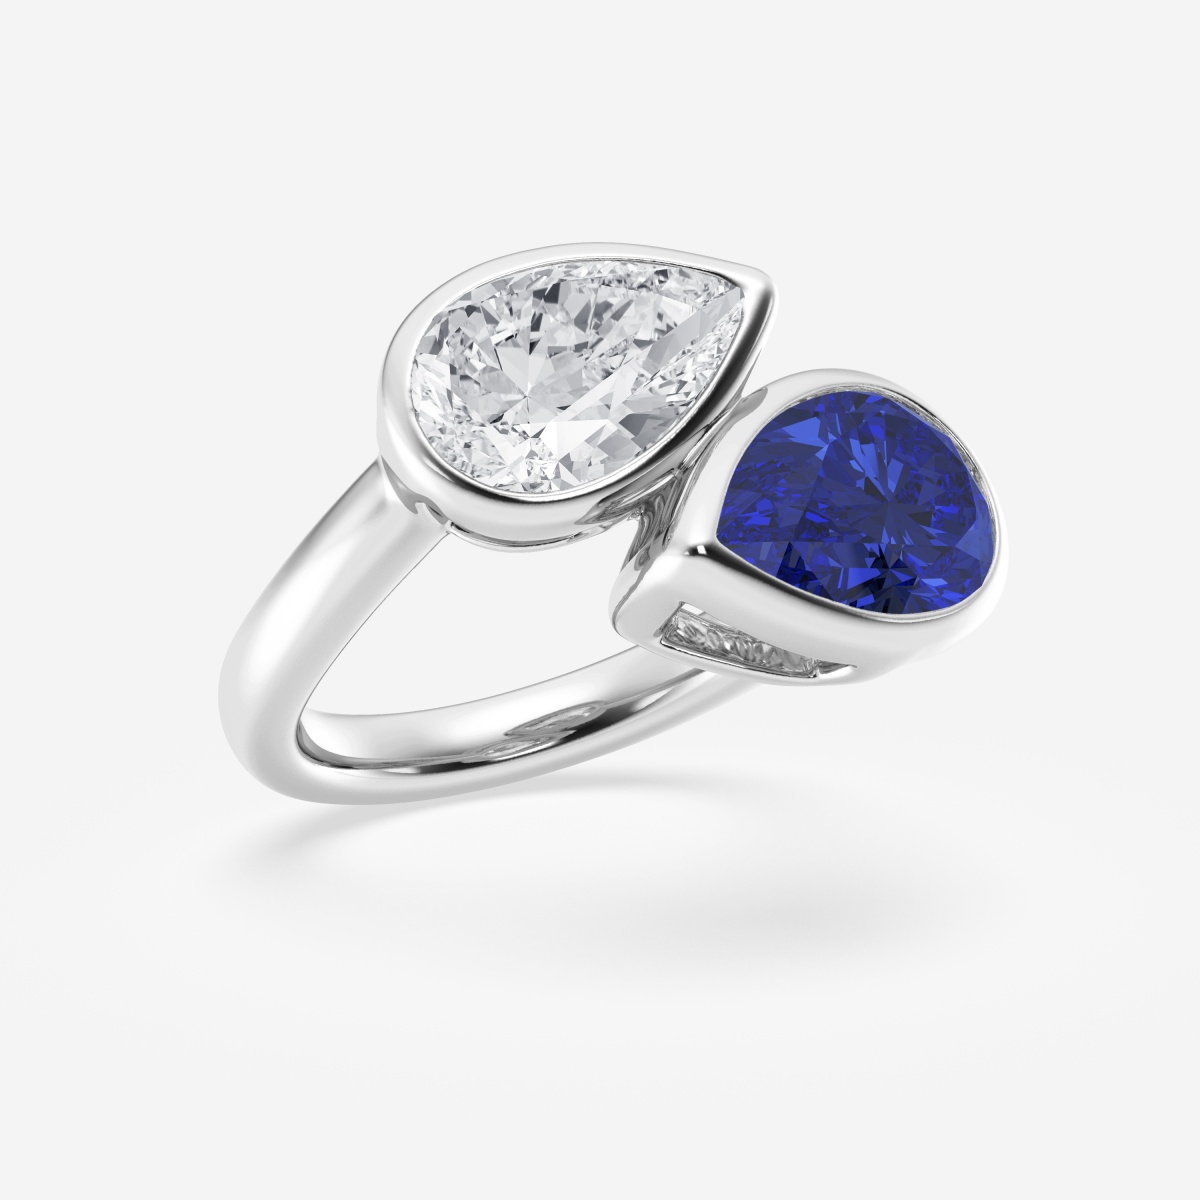 Additional Image 1 for  12.4x7.7 mm Pear Cut Created Sapphire and 2 ctw Pear Lab Grown Diamond Bypass Two Stone Fashion Ring